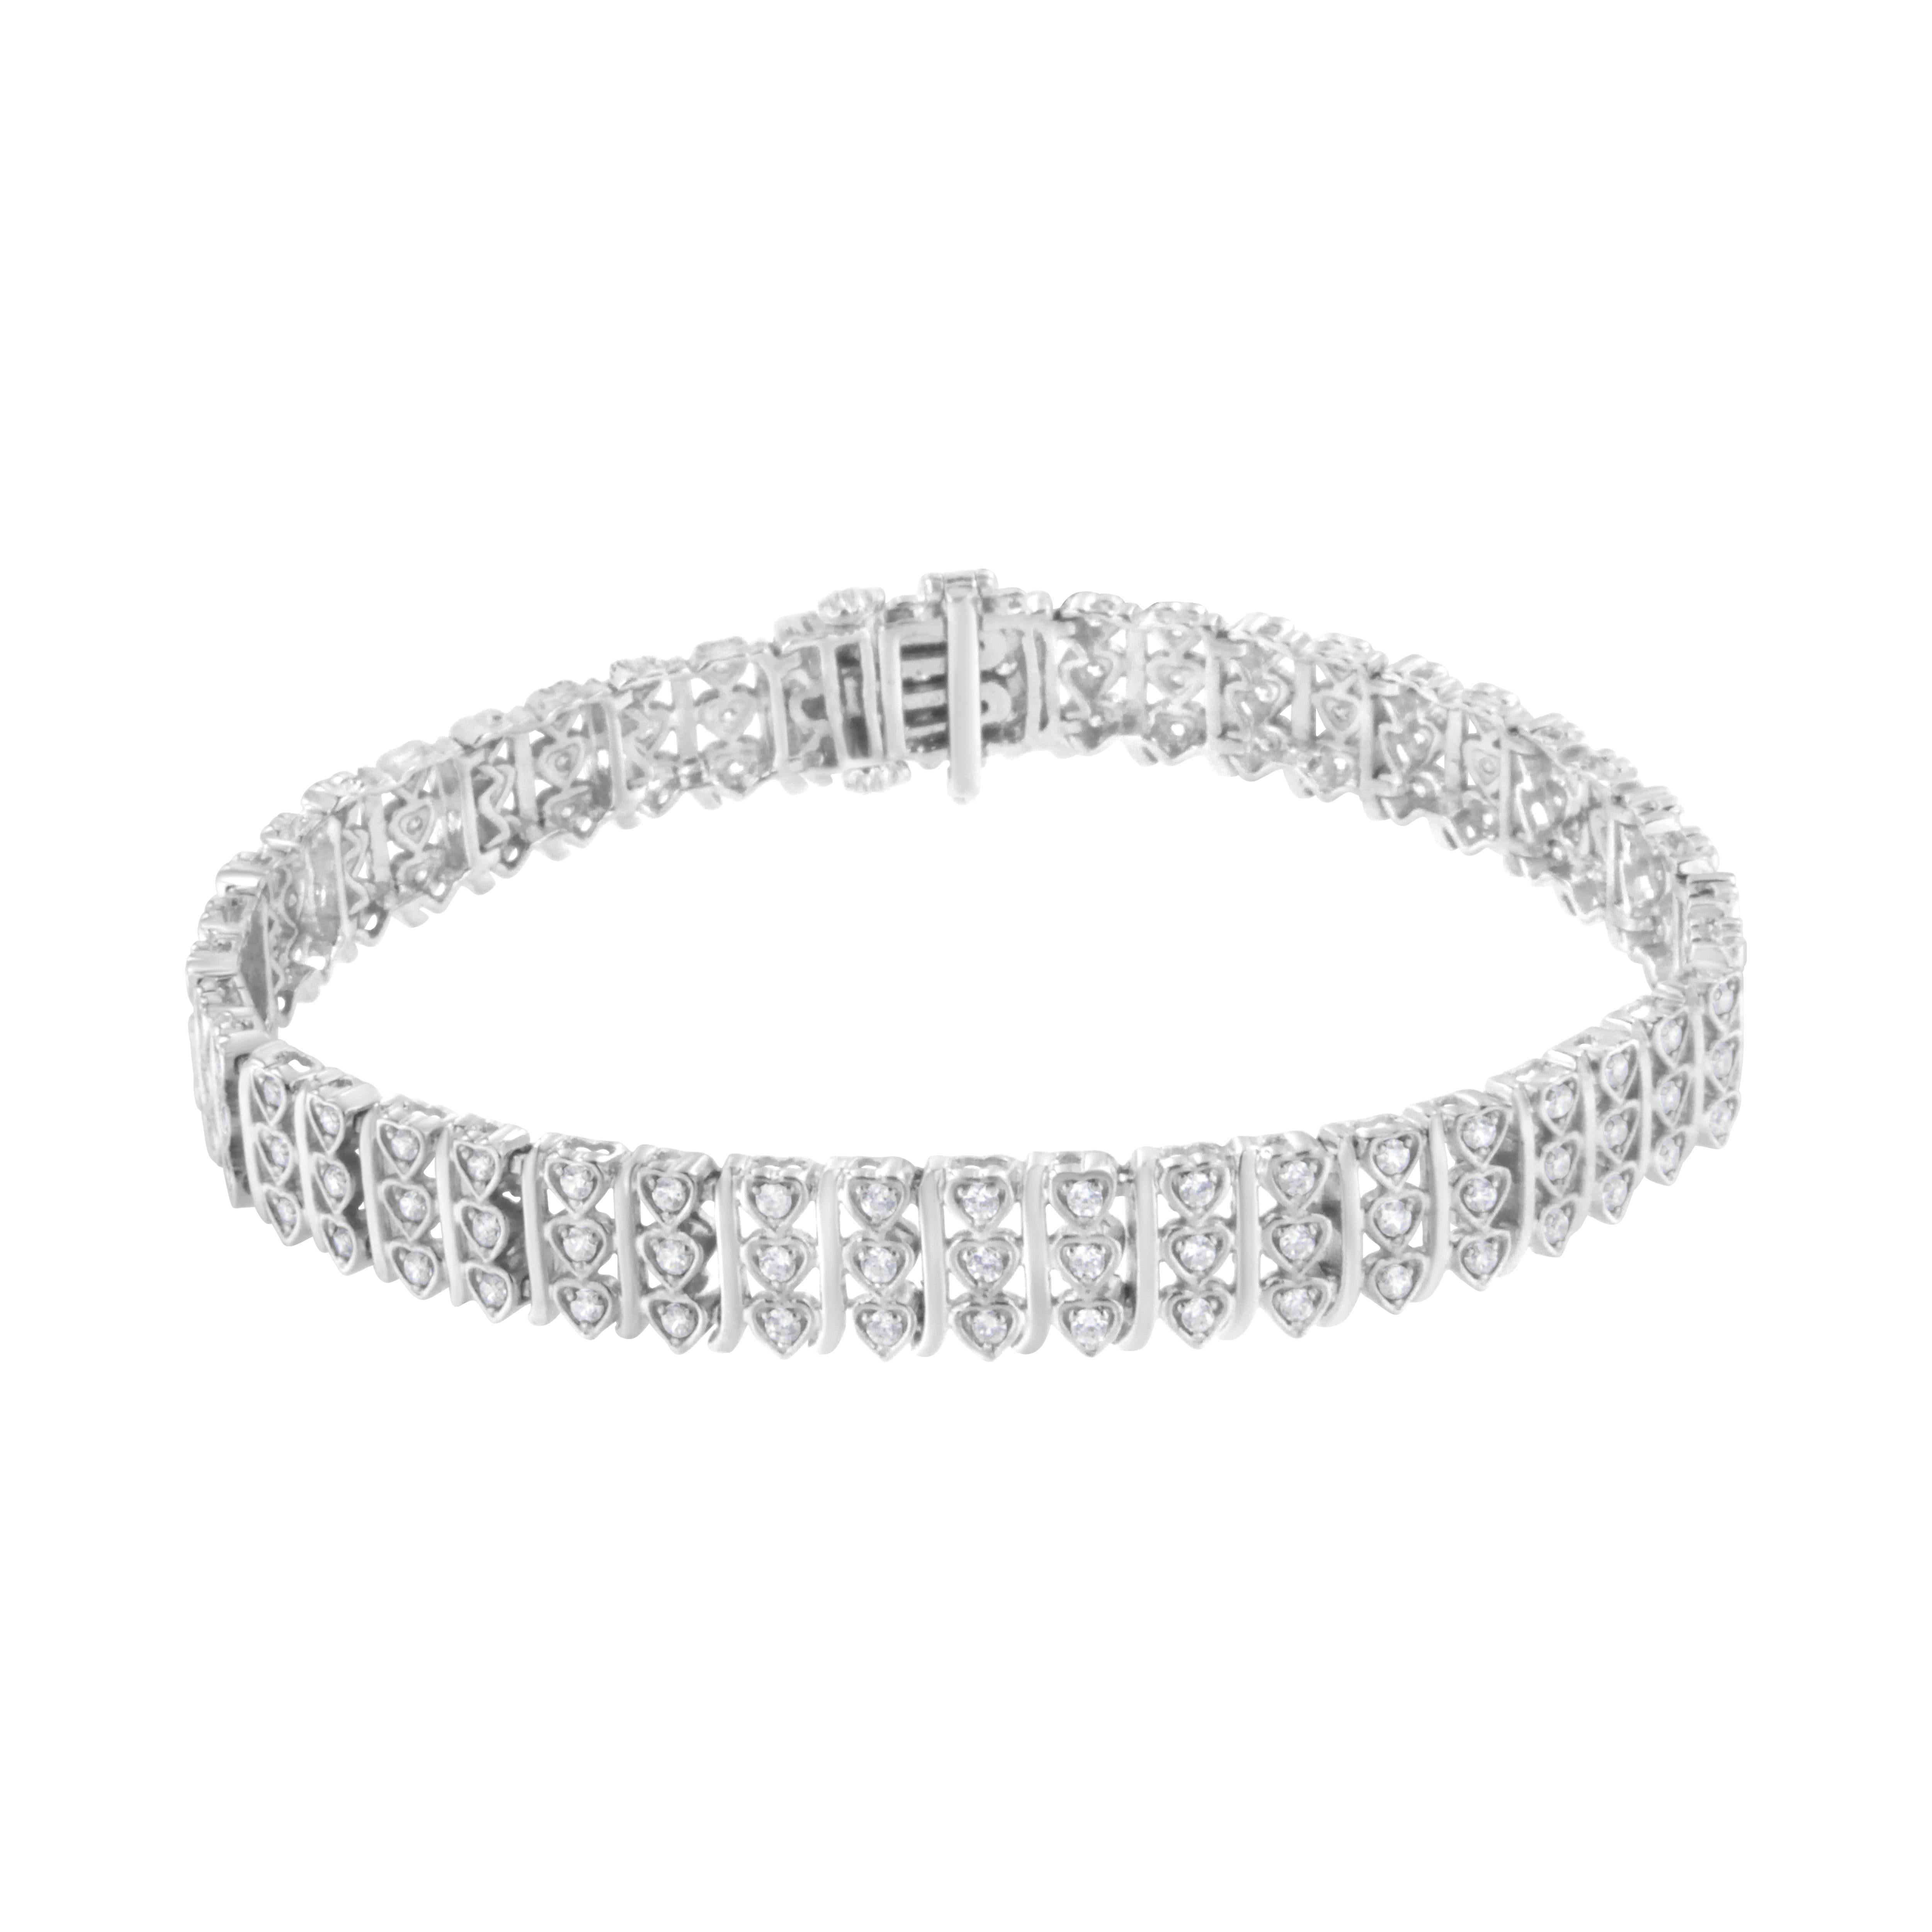 This lovely sterling silver bracelet features 1 1/2 carats of beautiful, natural diamonds. The design of this piece features a repetitive pattern of vertical rows of 3 silver hearts, each embellished with a round-cut diamond, separated by a subtle